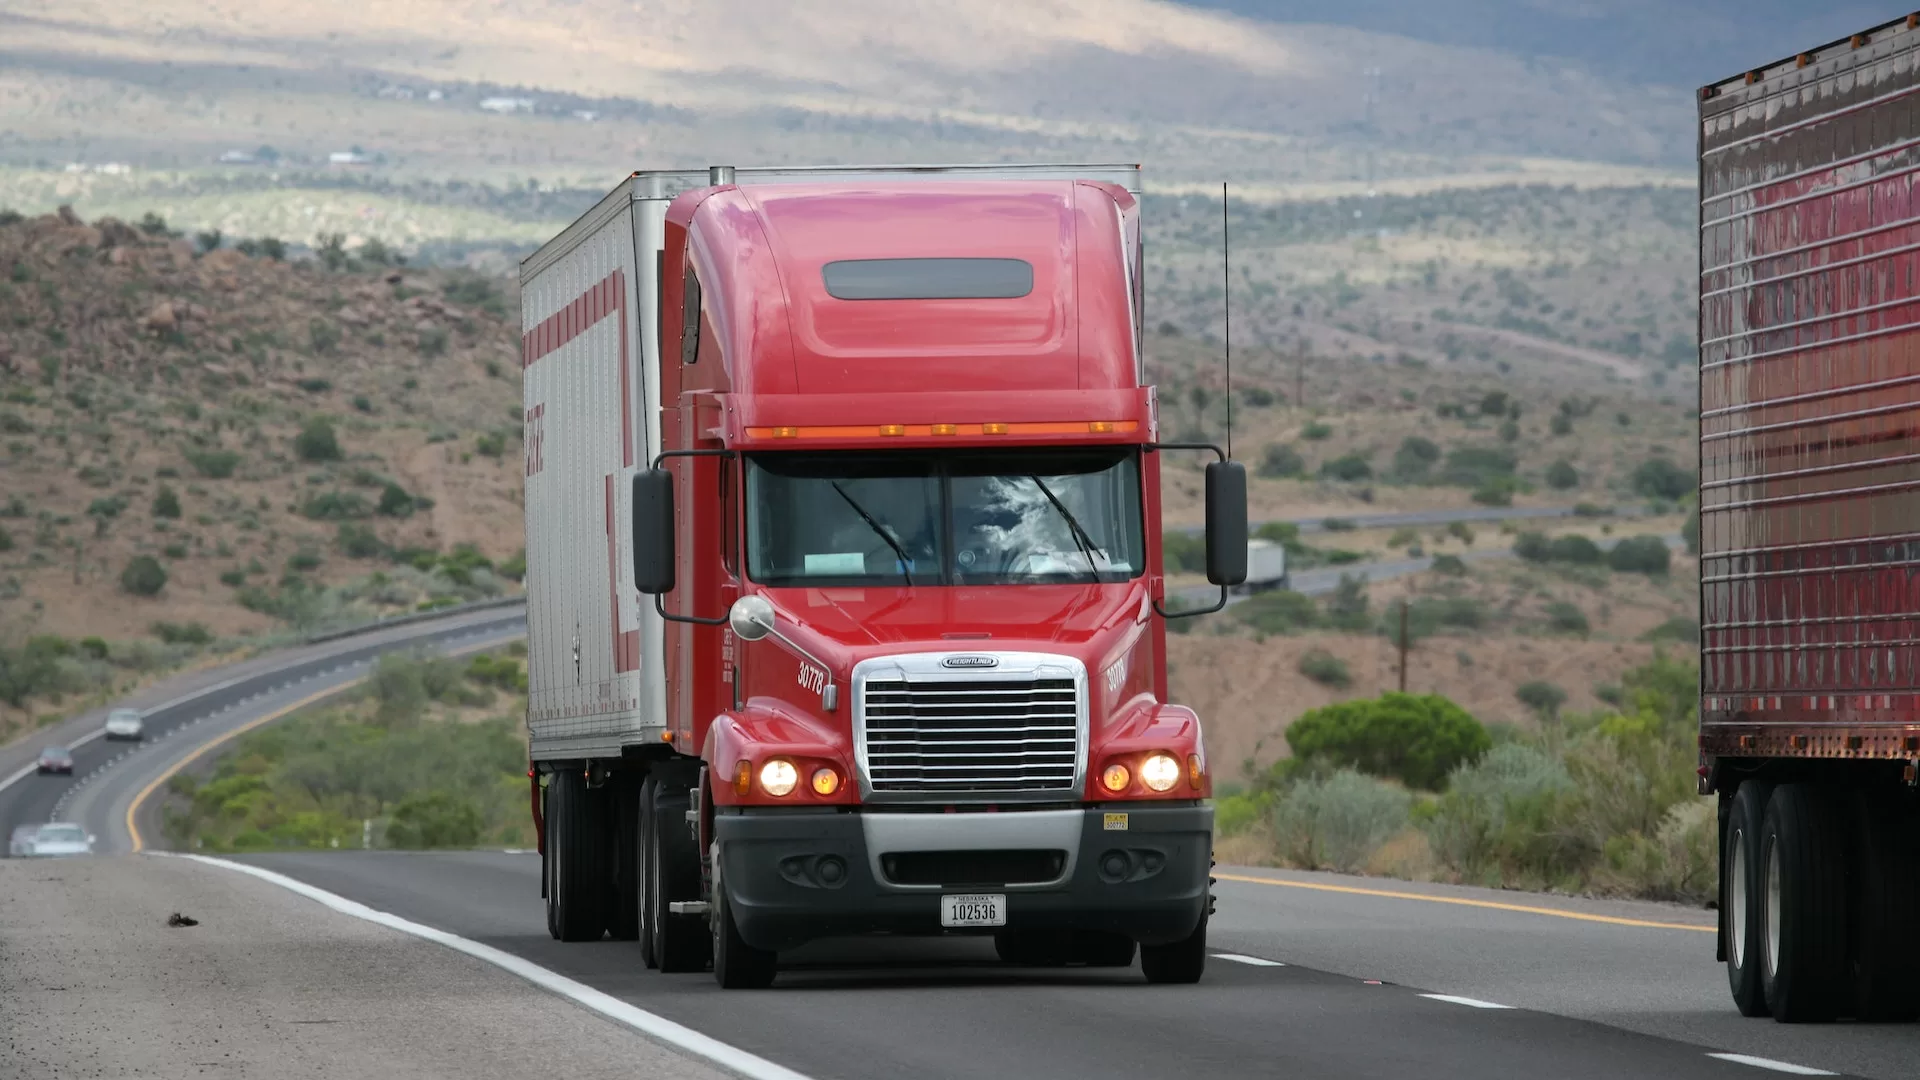 Image of a red colour truck on a toll lane to represent FASTag payment issues